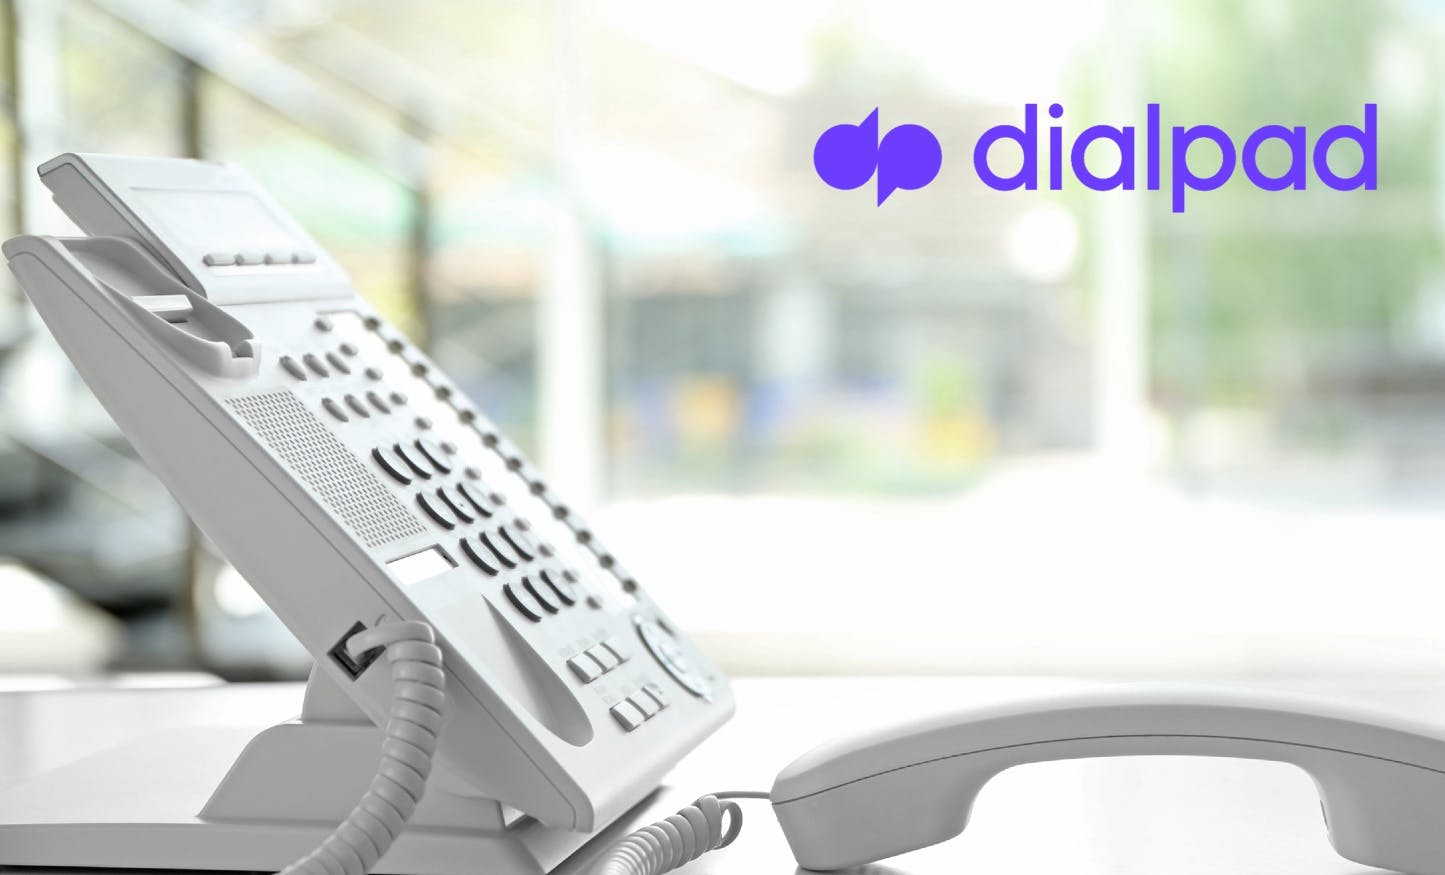 Dialpad Review: Is It the Best Option for Small Businesses? 